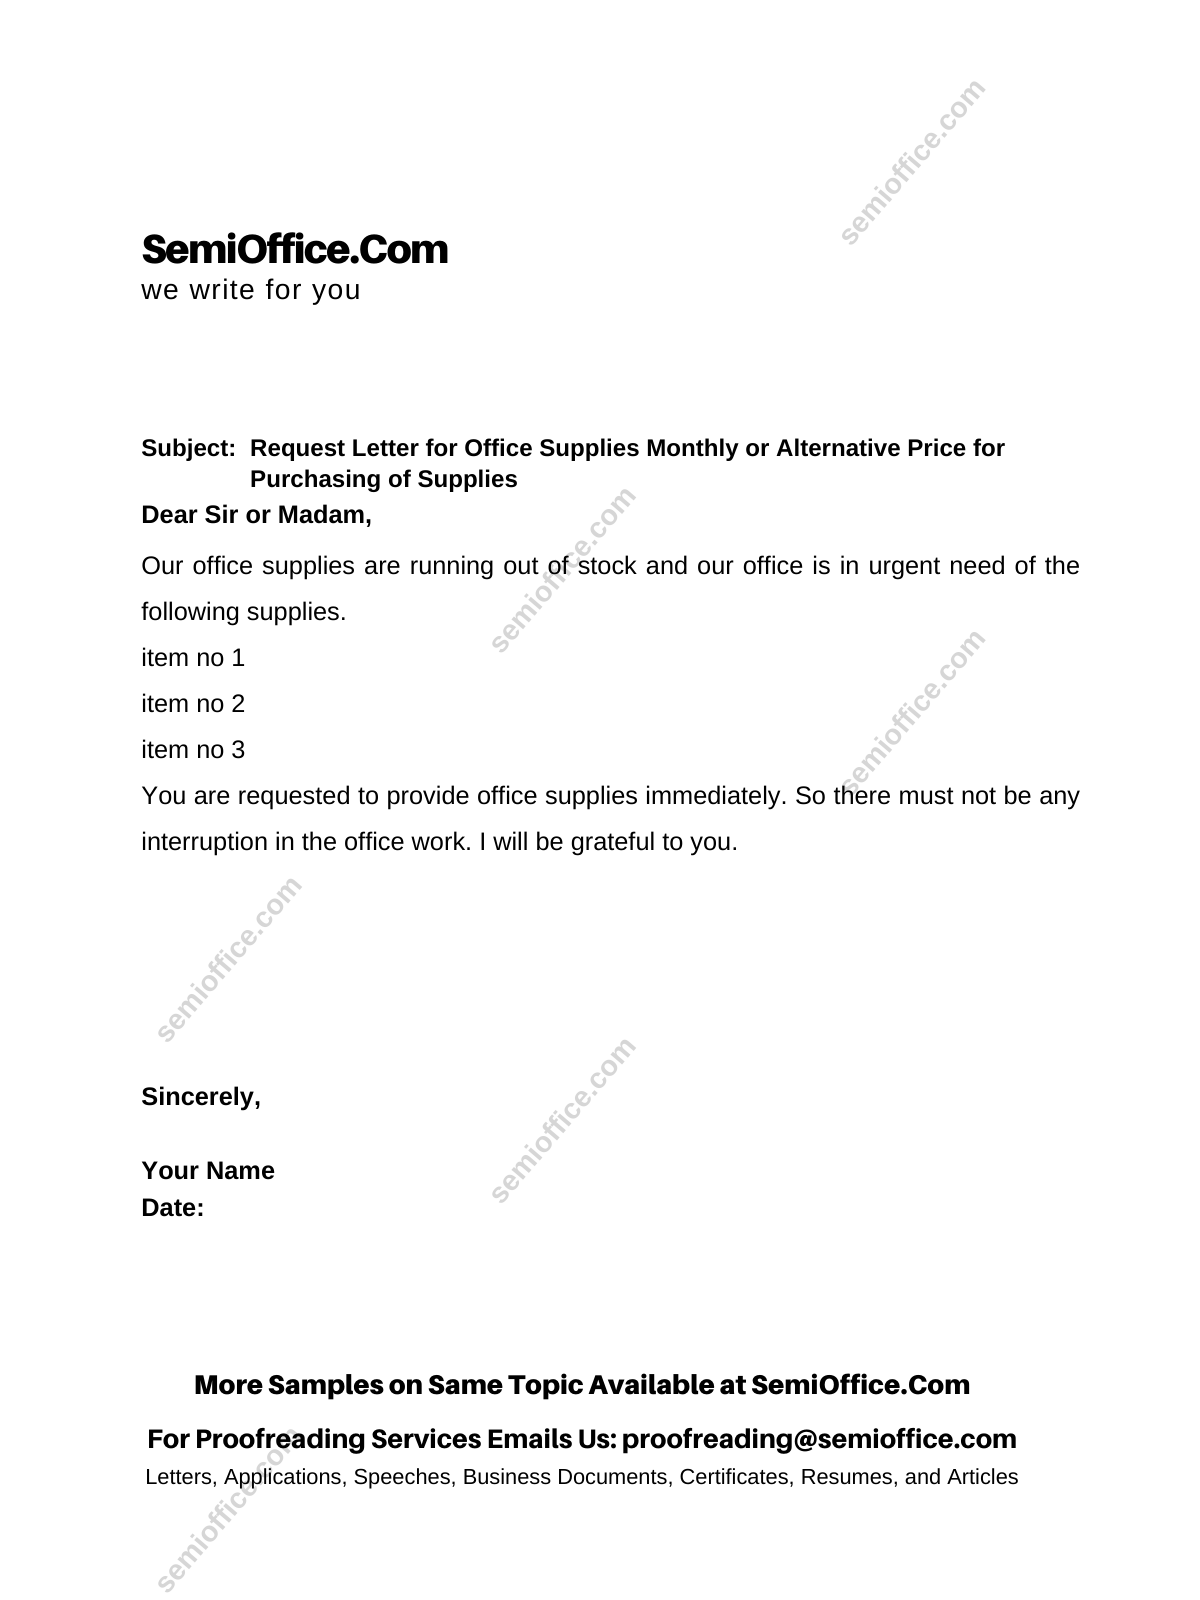 Request Letter For Office Supplies Monthly Or Alternative Price For Purchasing Of Supplies 